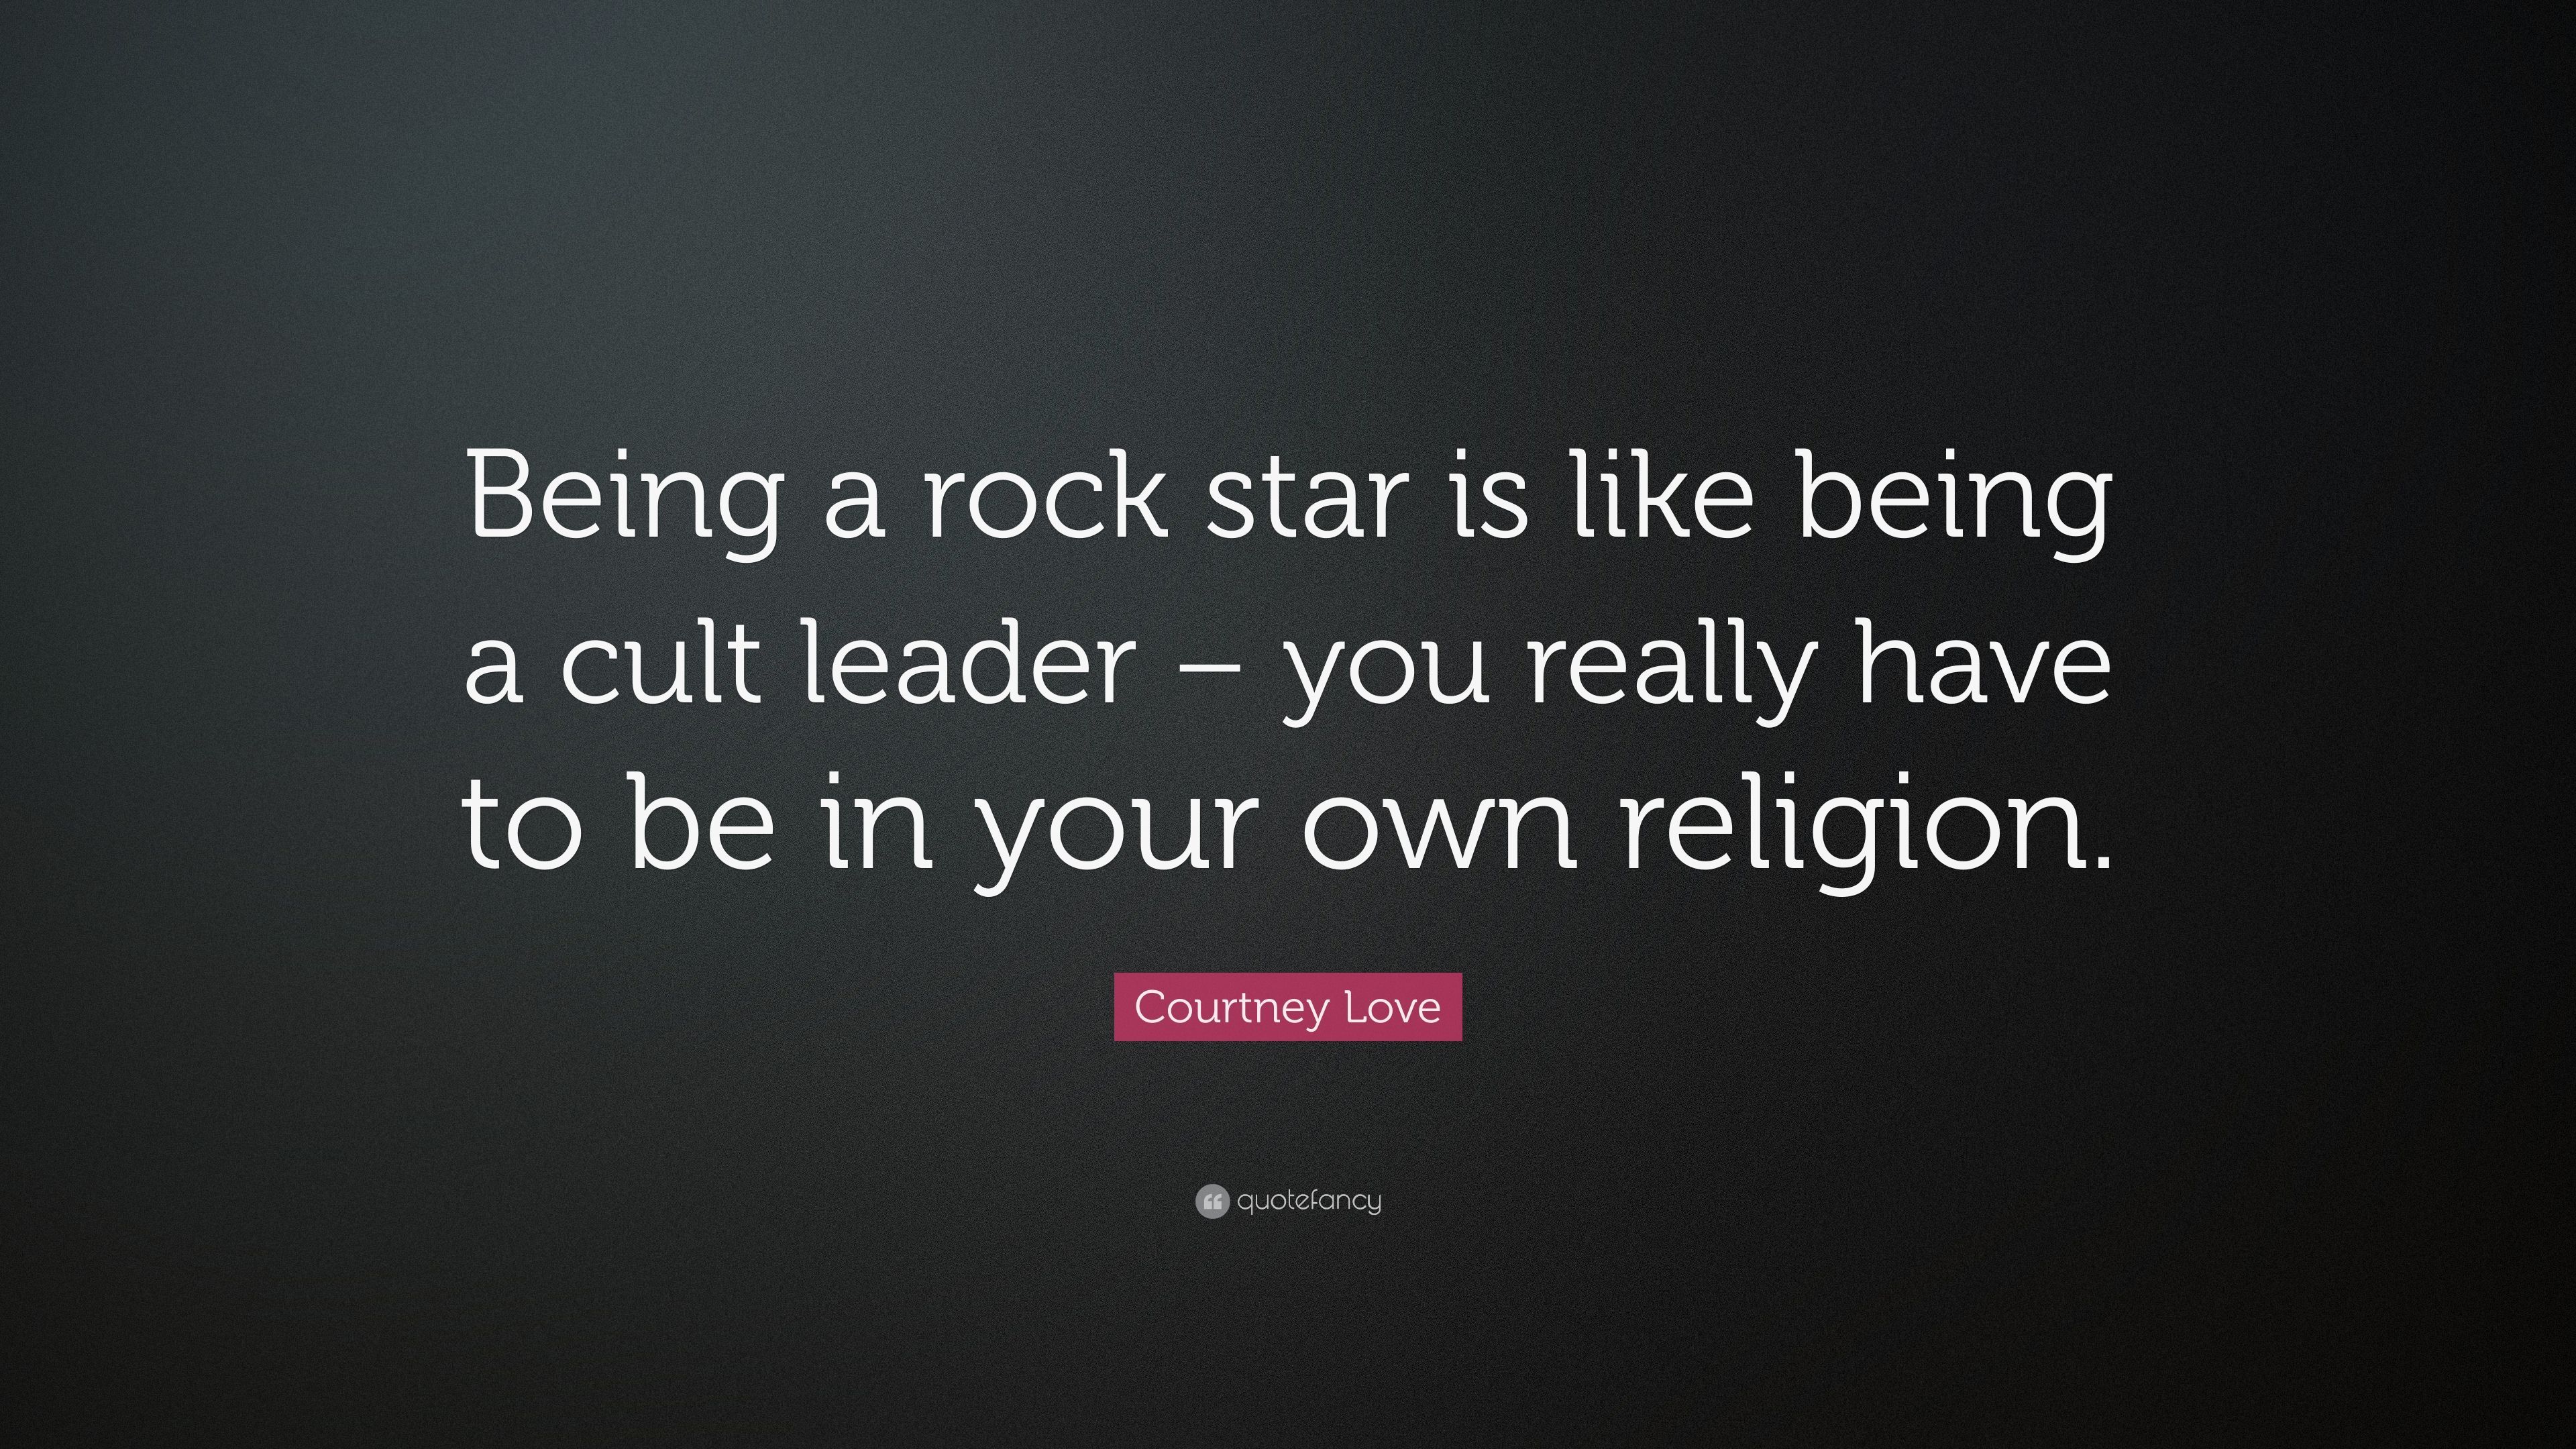 Courtney Love Quote: “Being a rock star is like being a cult